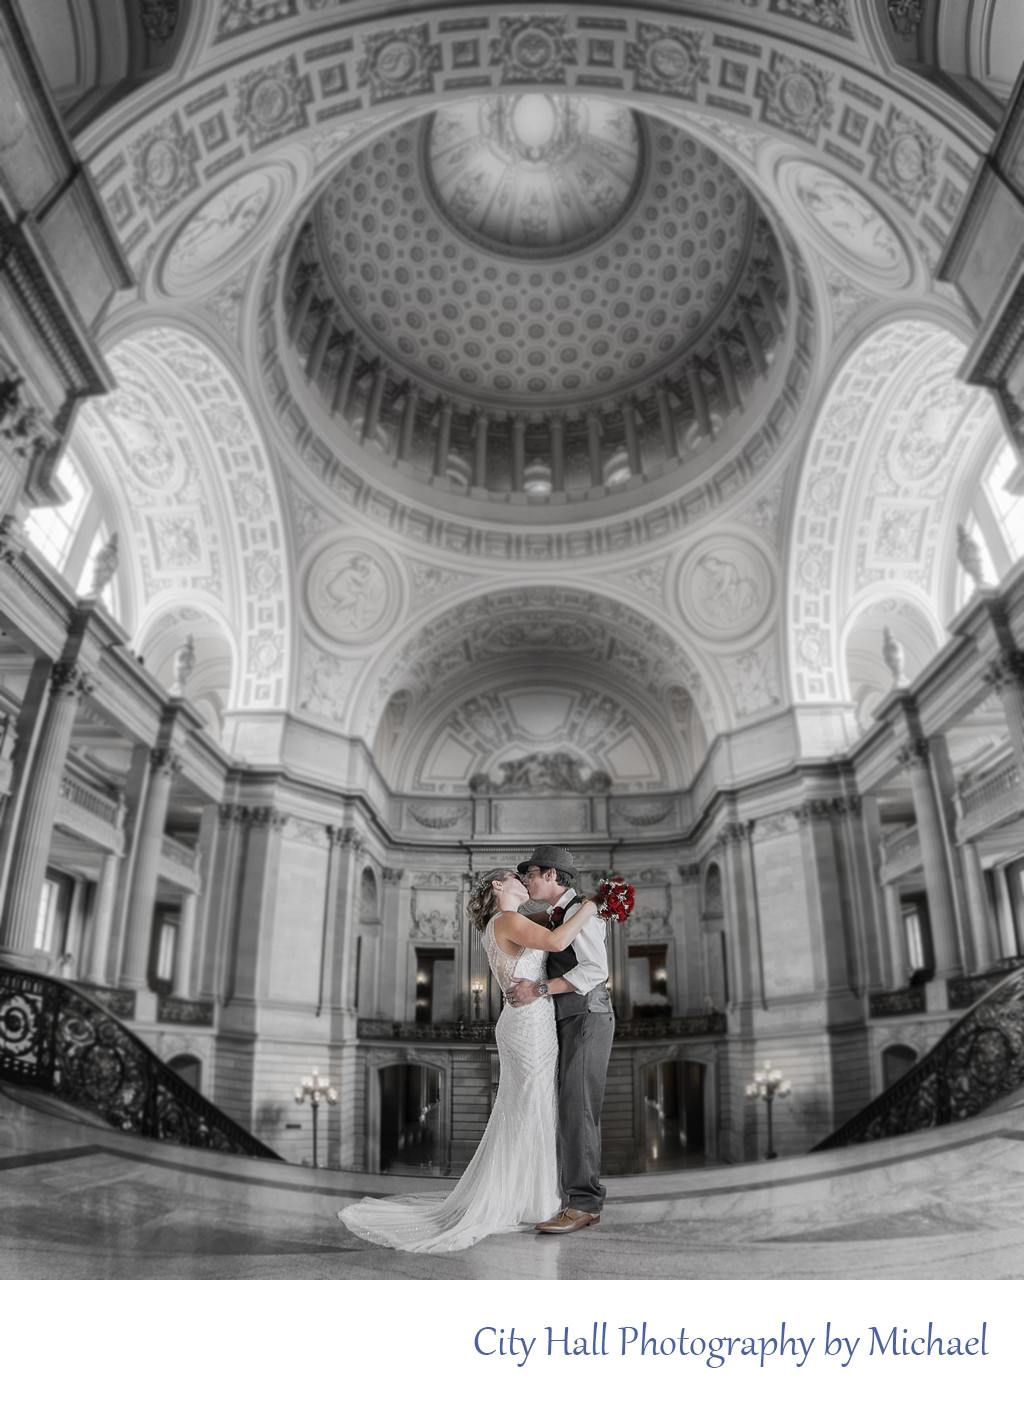 San Francisco Marriage in Black and White at City Hall